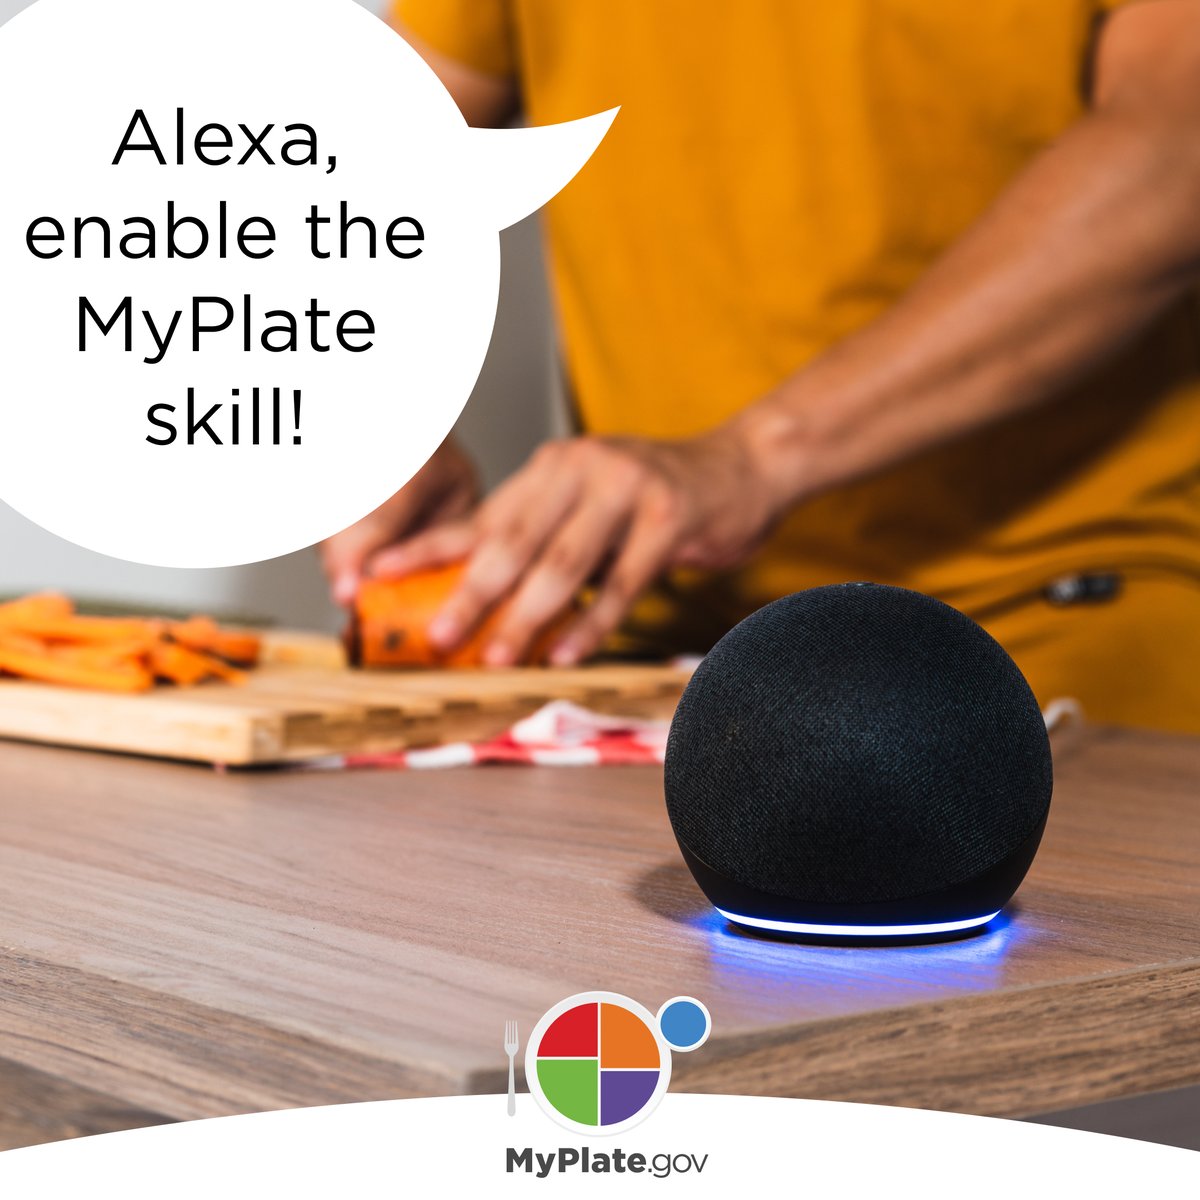 Did you know #MyPlate is on #Alexa? You can get nutrition information based on your age and life stage - whether you’re looking for food recommendations for a toddler, an older adult, or anyone in between. bit.ly/44g5IDR #MyPlateOnAlexa #AlexaSkills